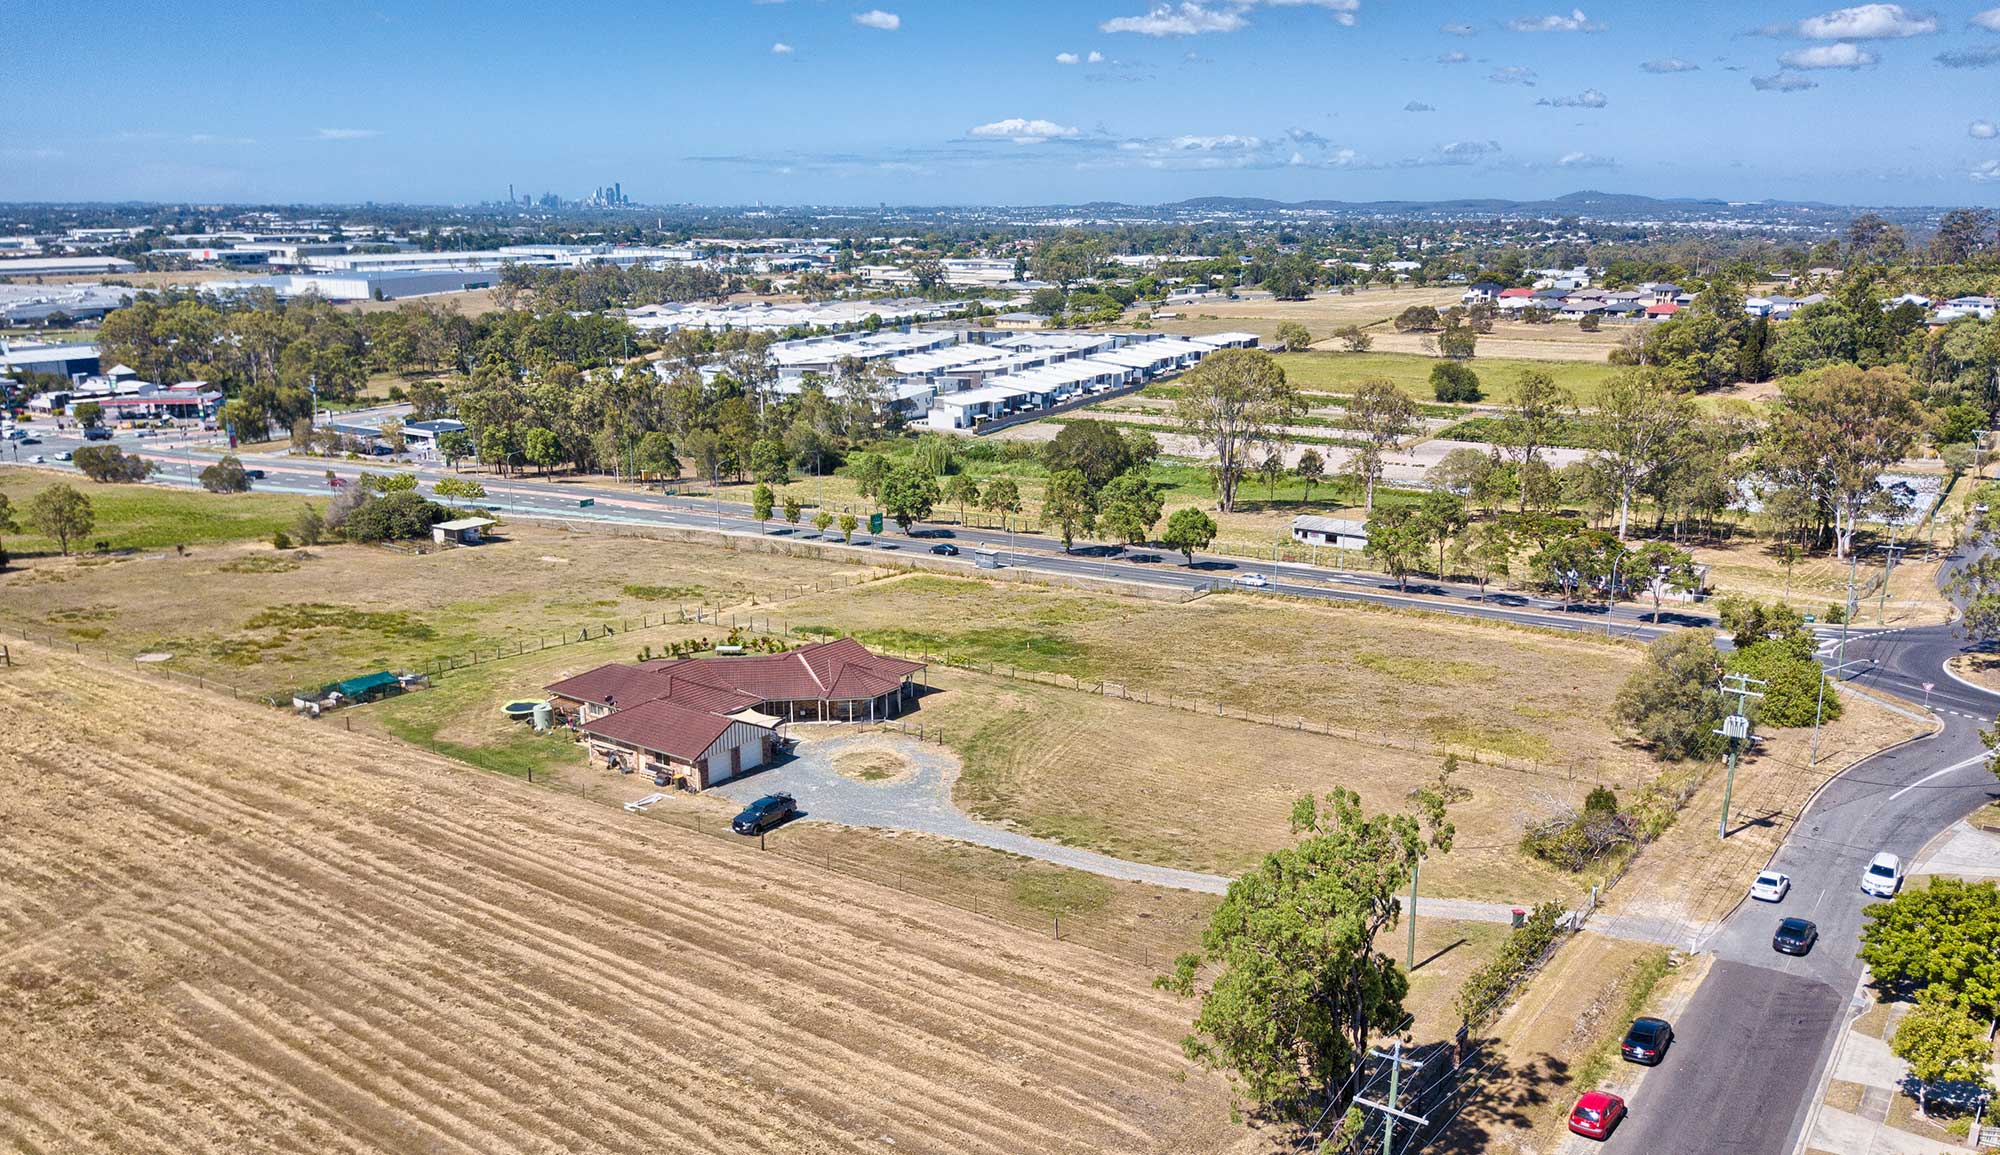 Drone photography of Government Rd, Richlands from 30m